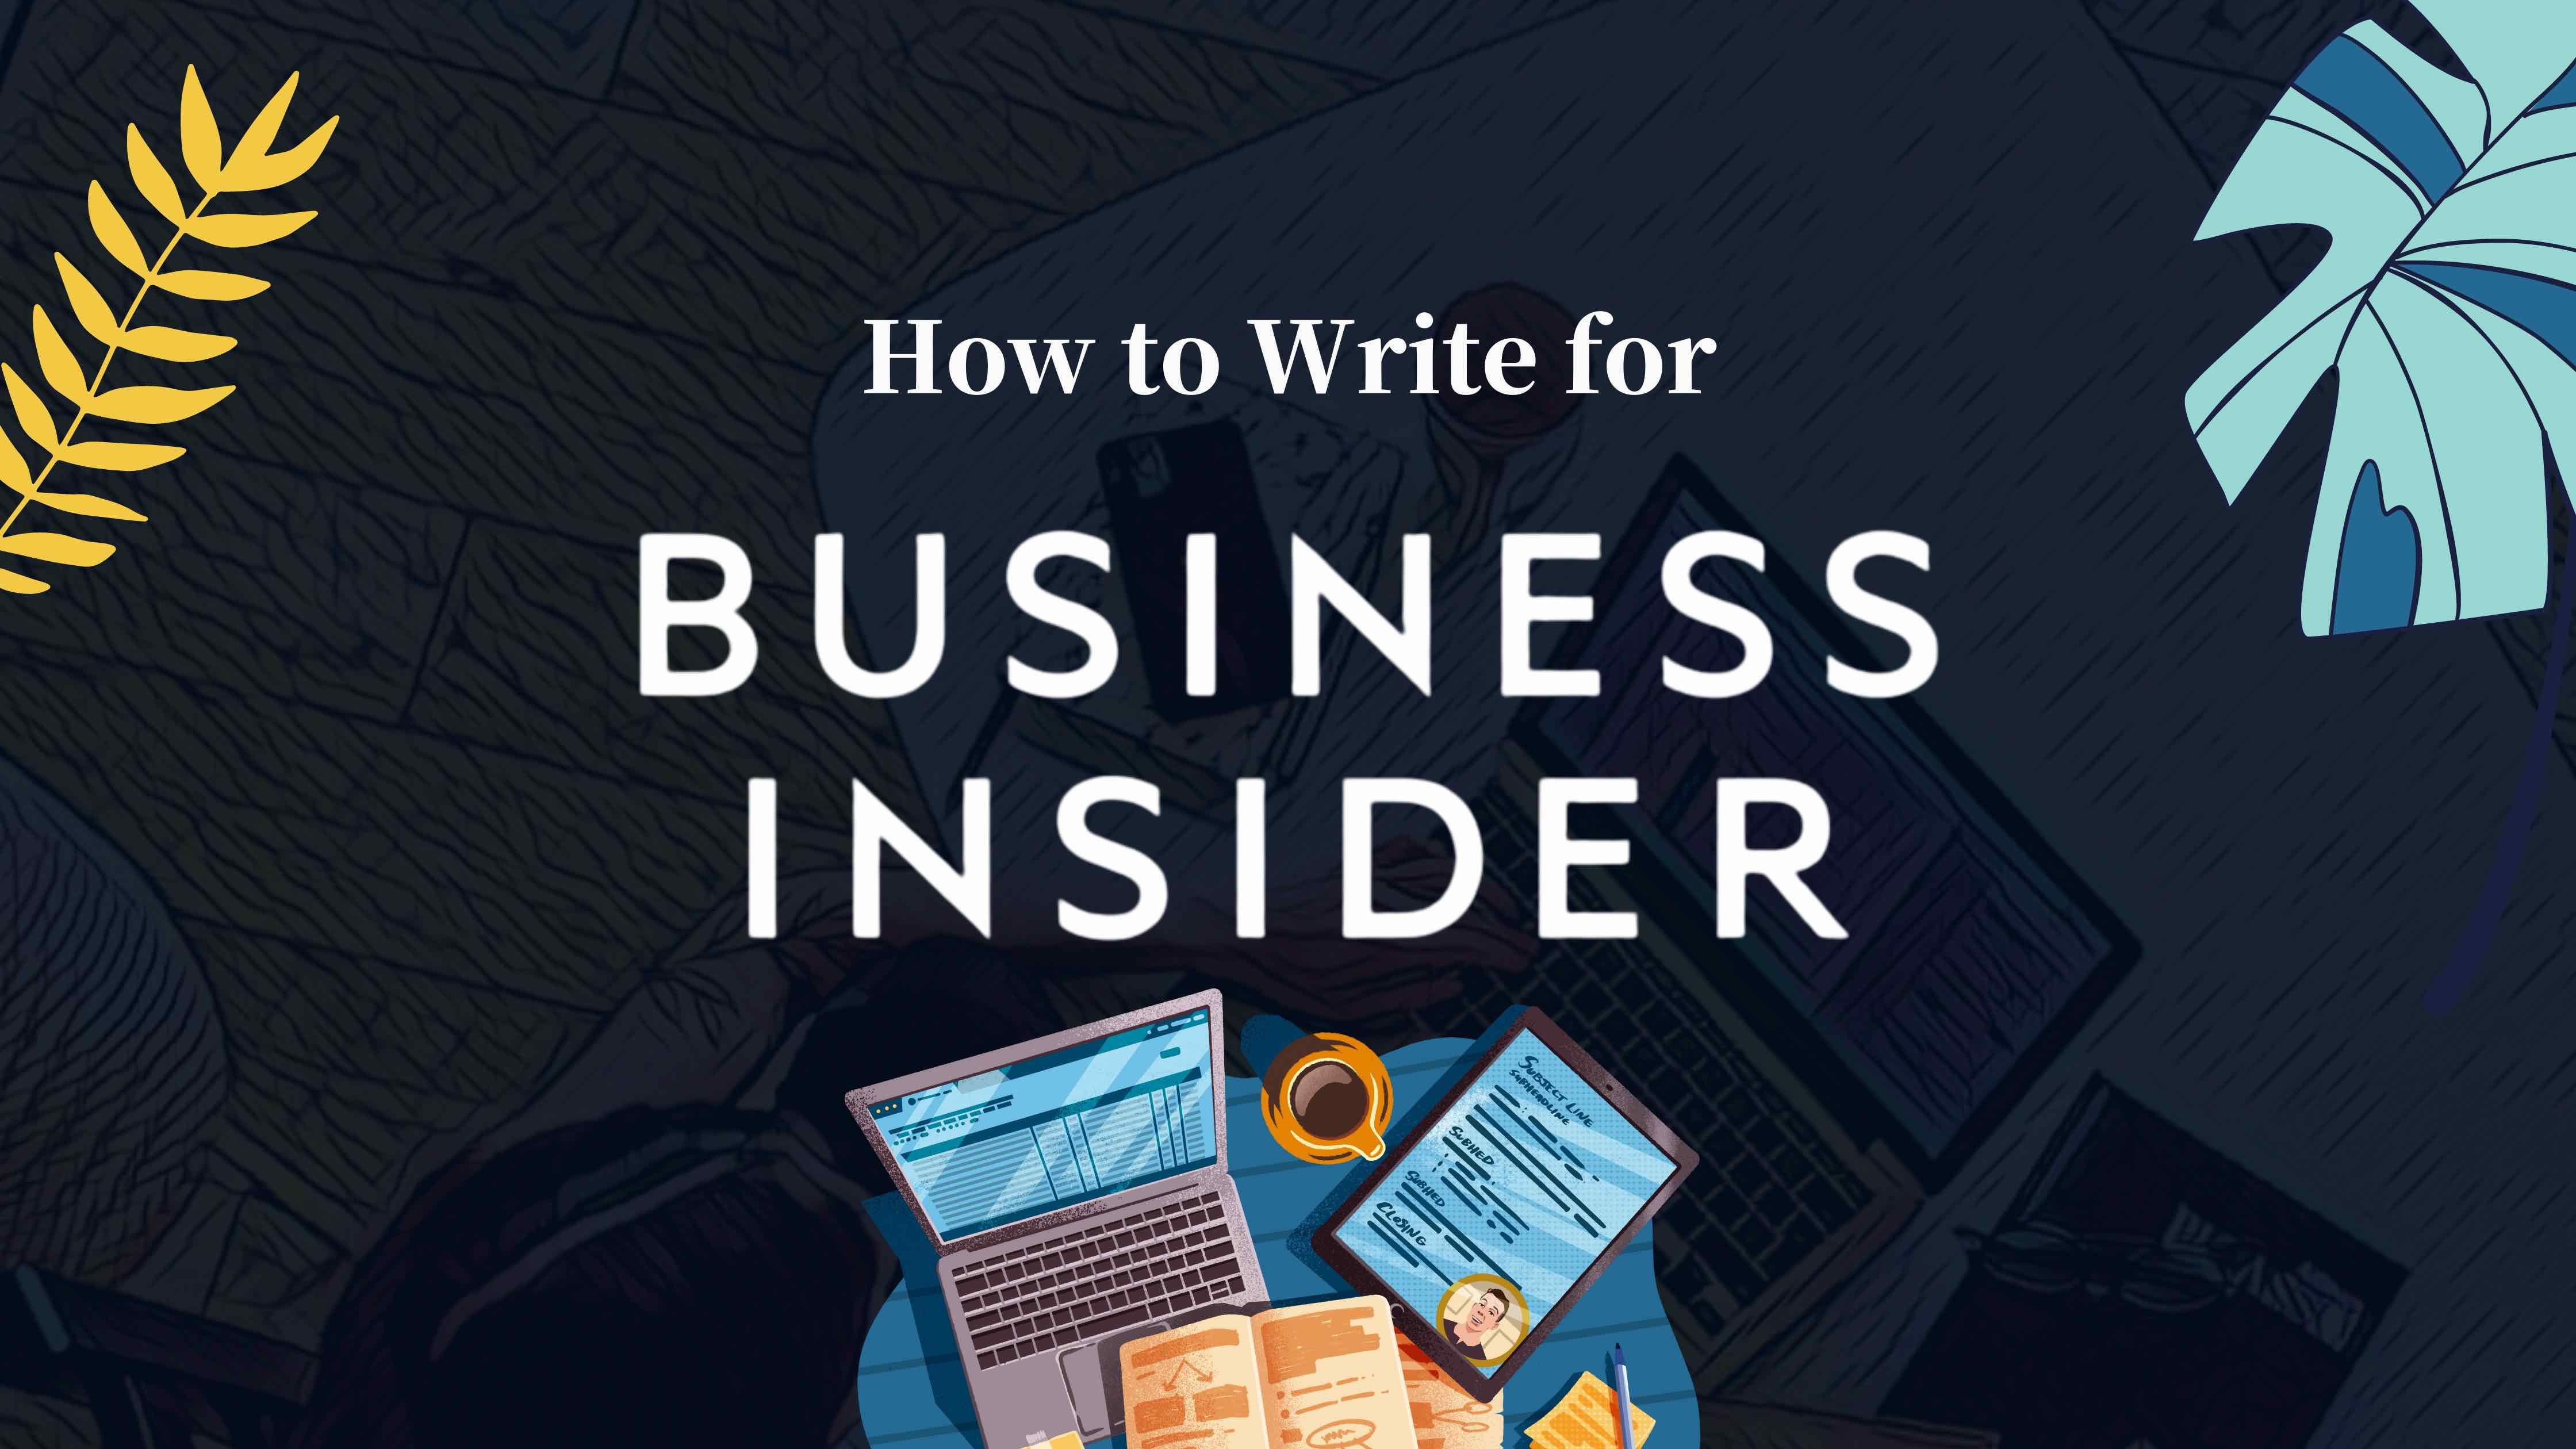 How to Write for Business Insider, Get Exposure, and Elevate Your Brand